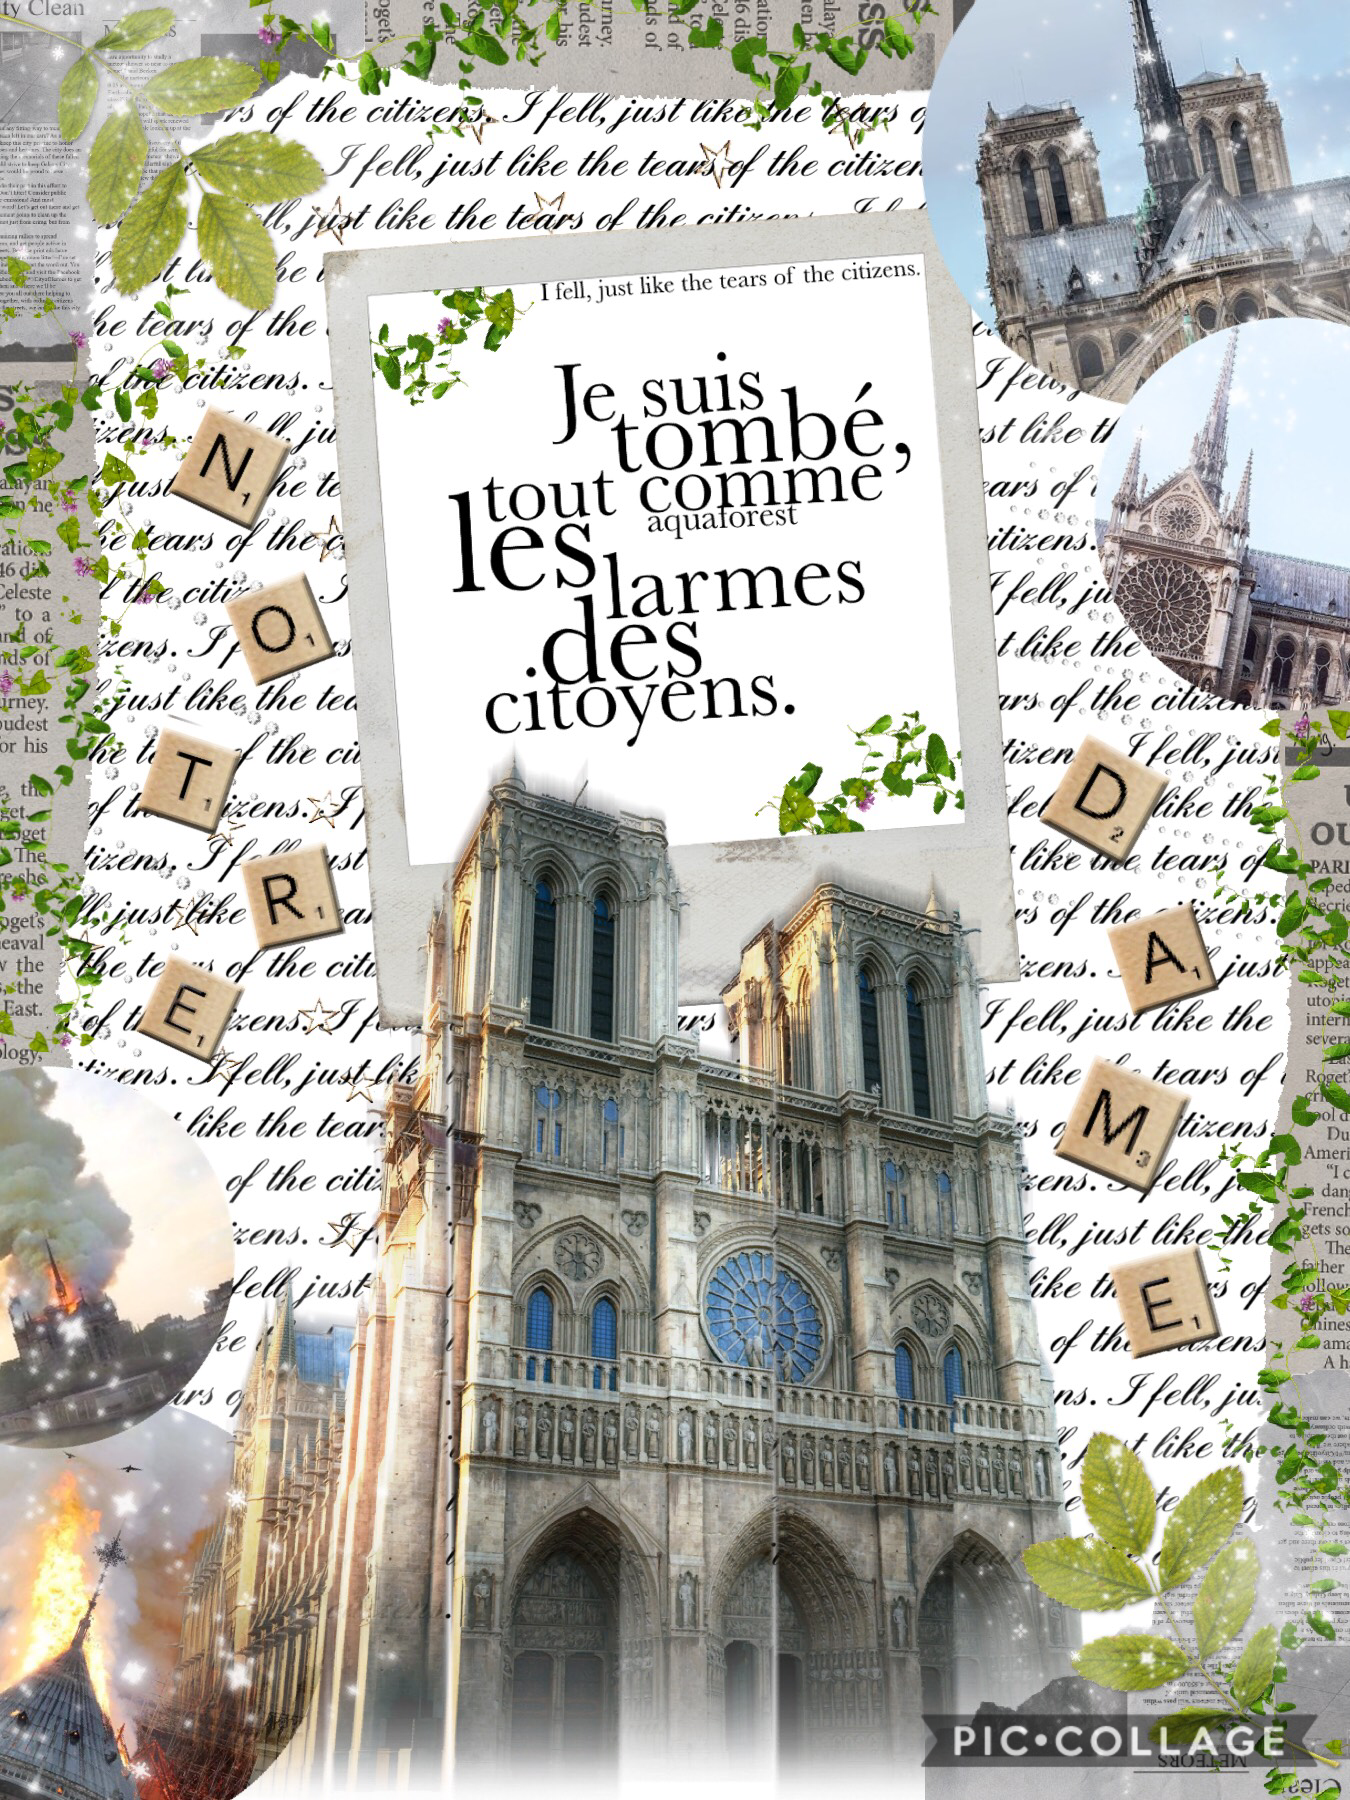 tap!
WHOOOOP today is the last day of school be4 Easter hols!!
I think imma do my news analysis/report on the Notre Dame
Uhhh the fReNcH text means ‘I fell, just like the tears of the citizens.’
Don’t worry I didn’t use google translate since it’s FaLiBLe